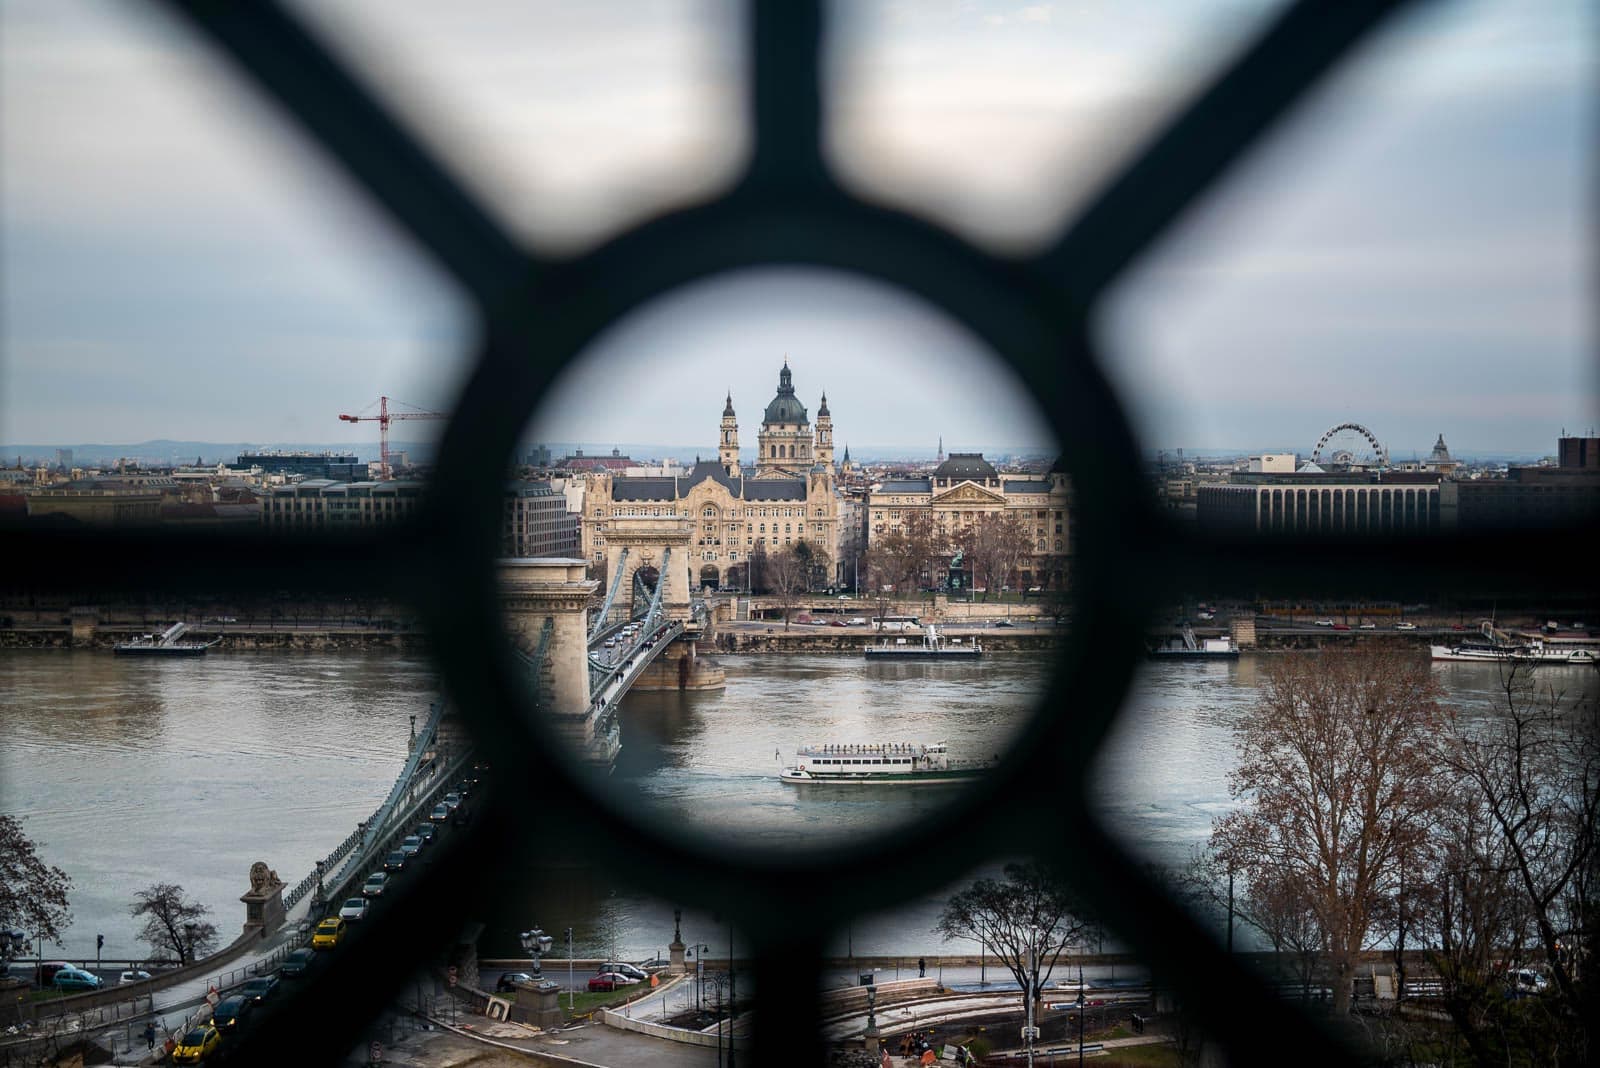 A view of the danube river through a window in budapest, hungary.